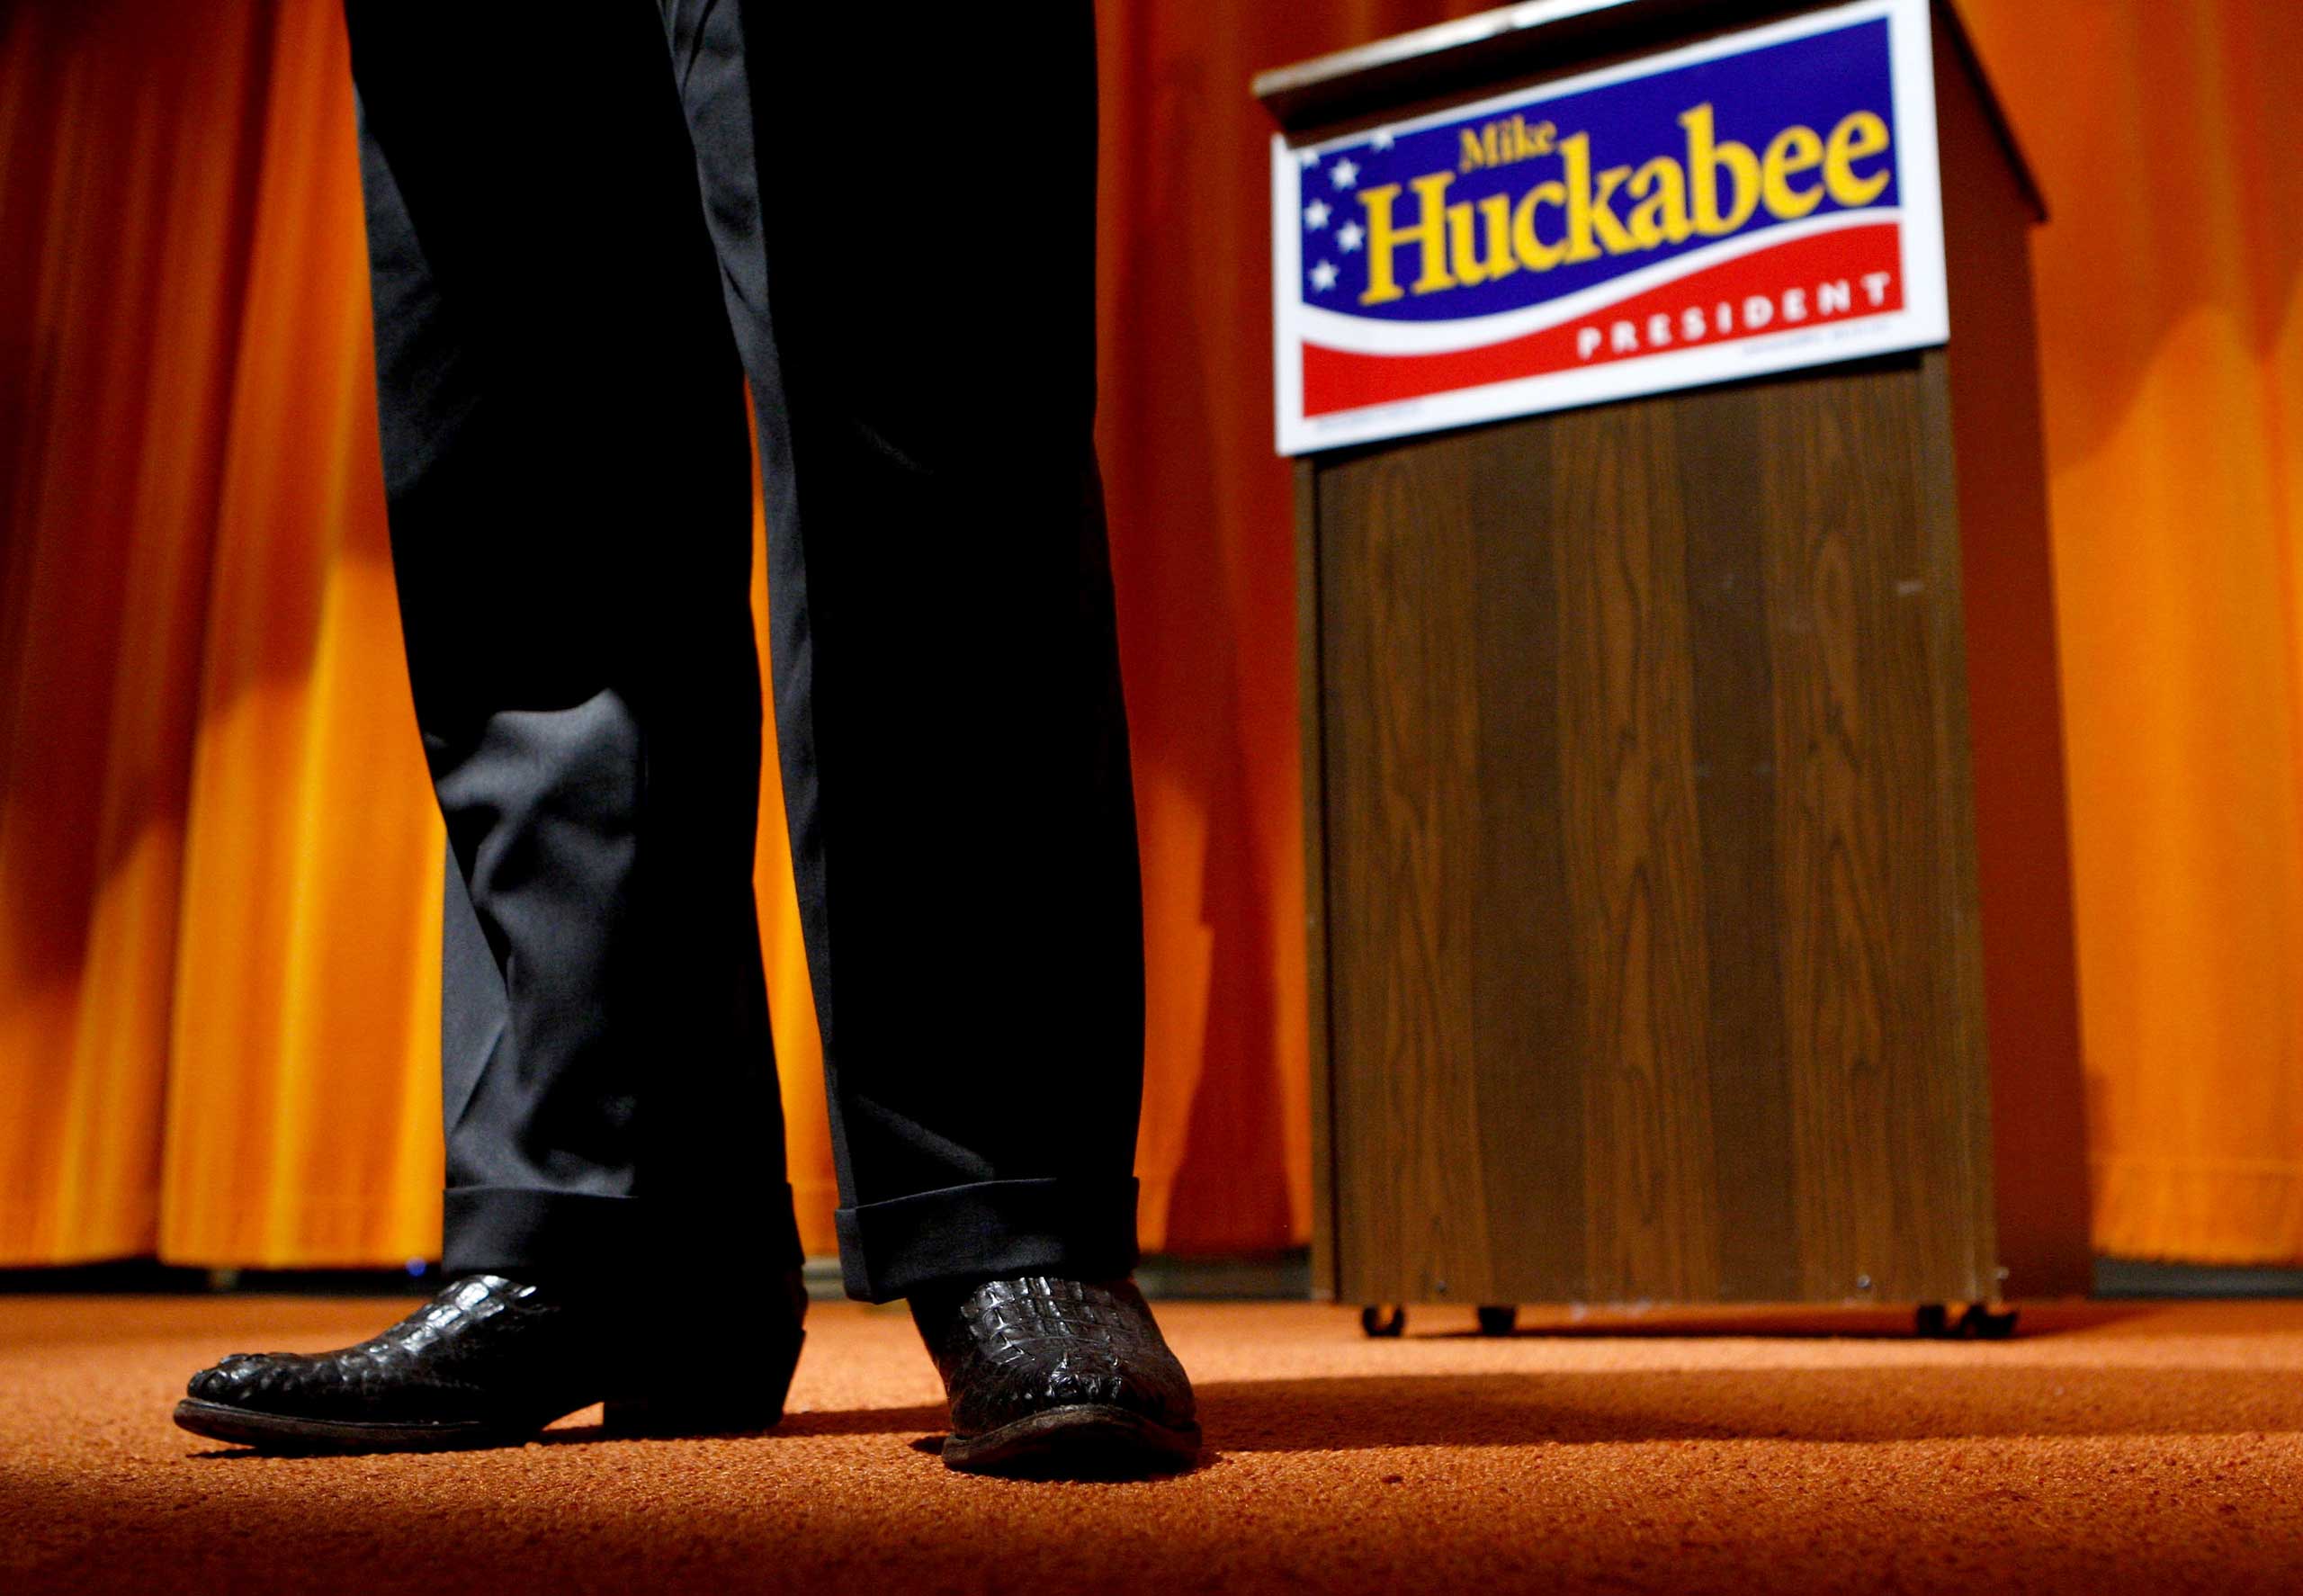 Former Arkansas Gov. Mike Huckabee also goes for the look.